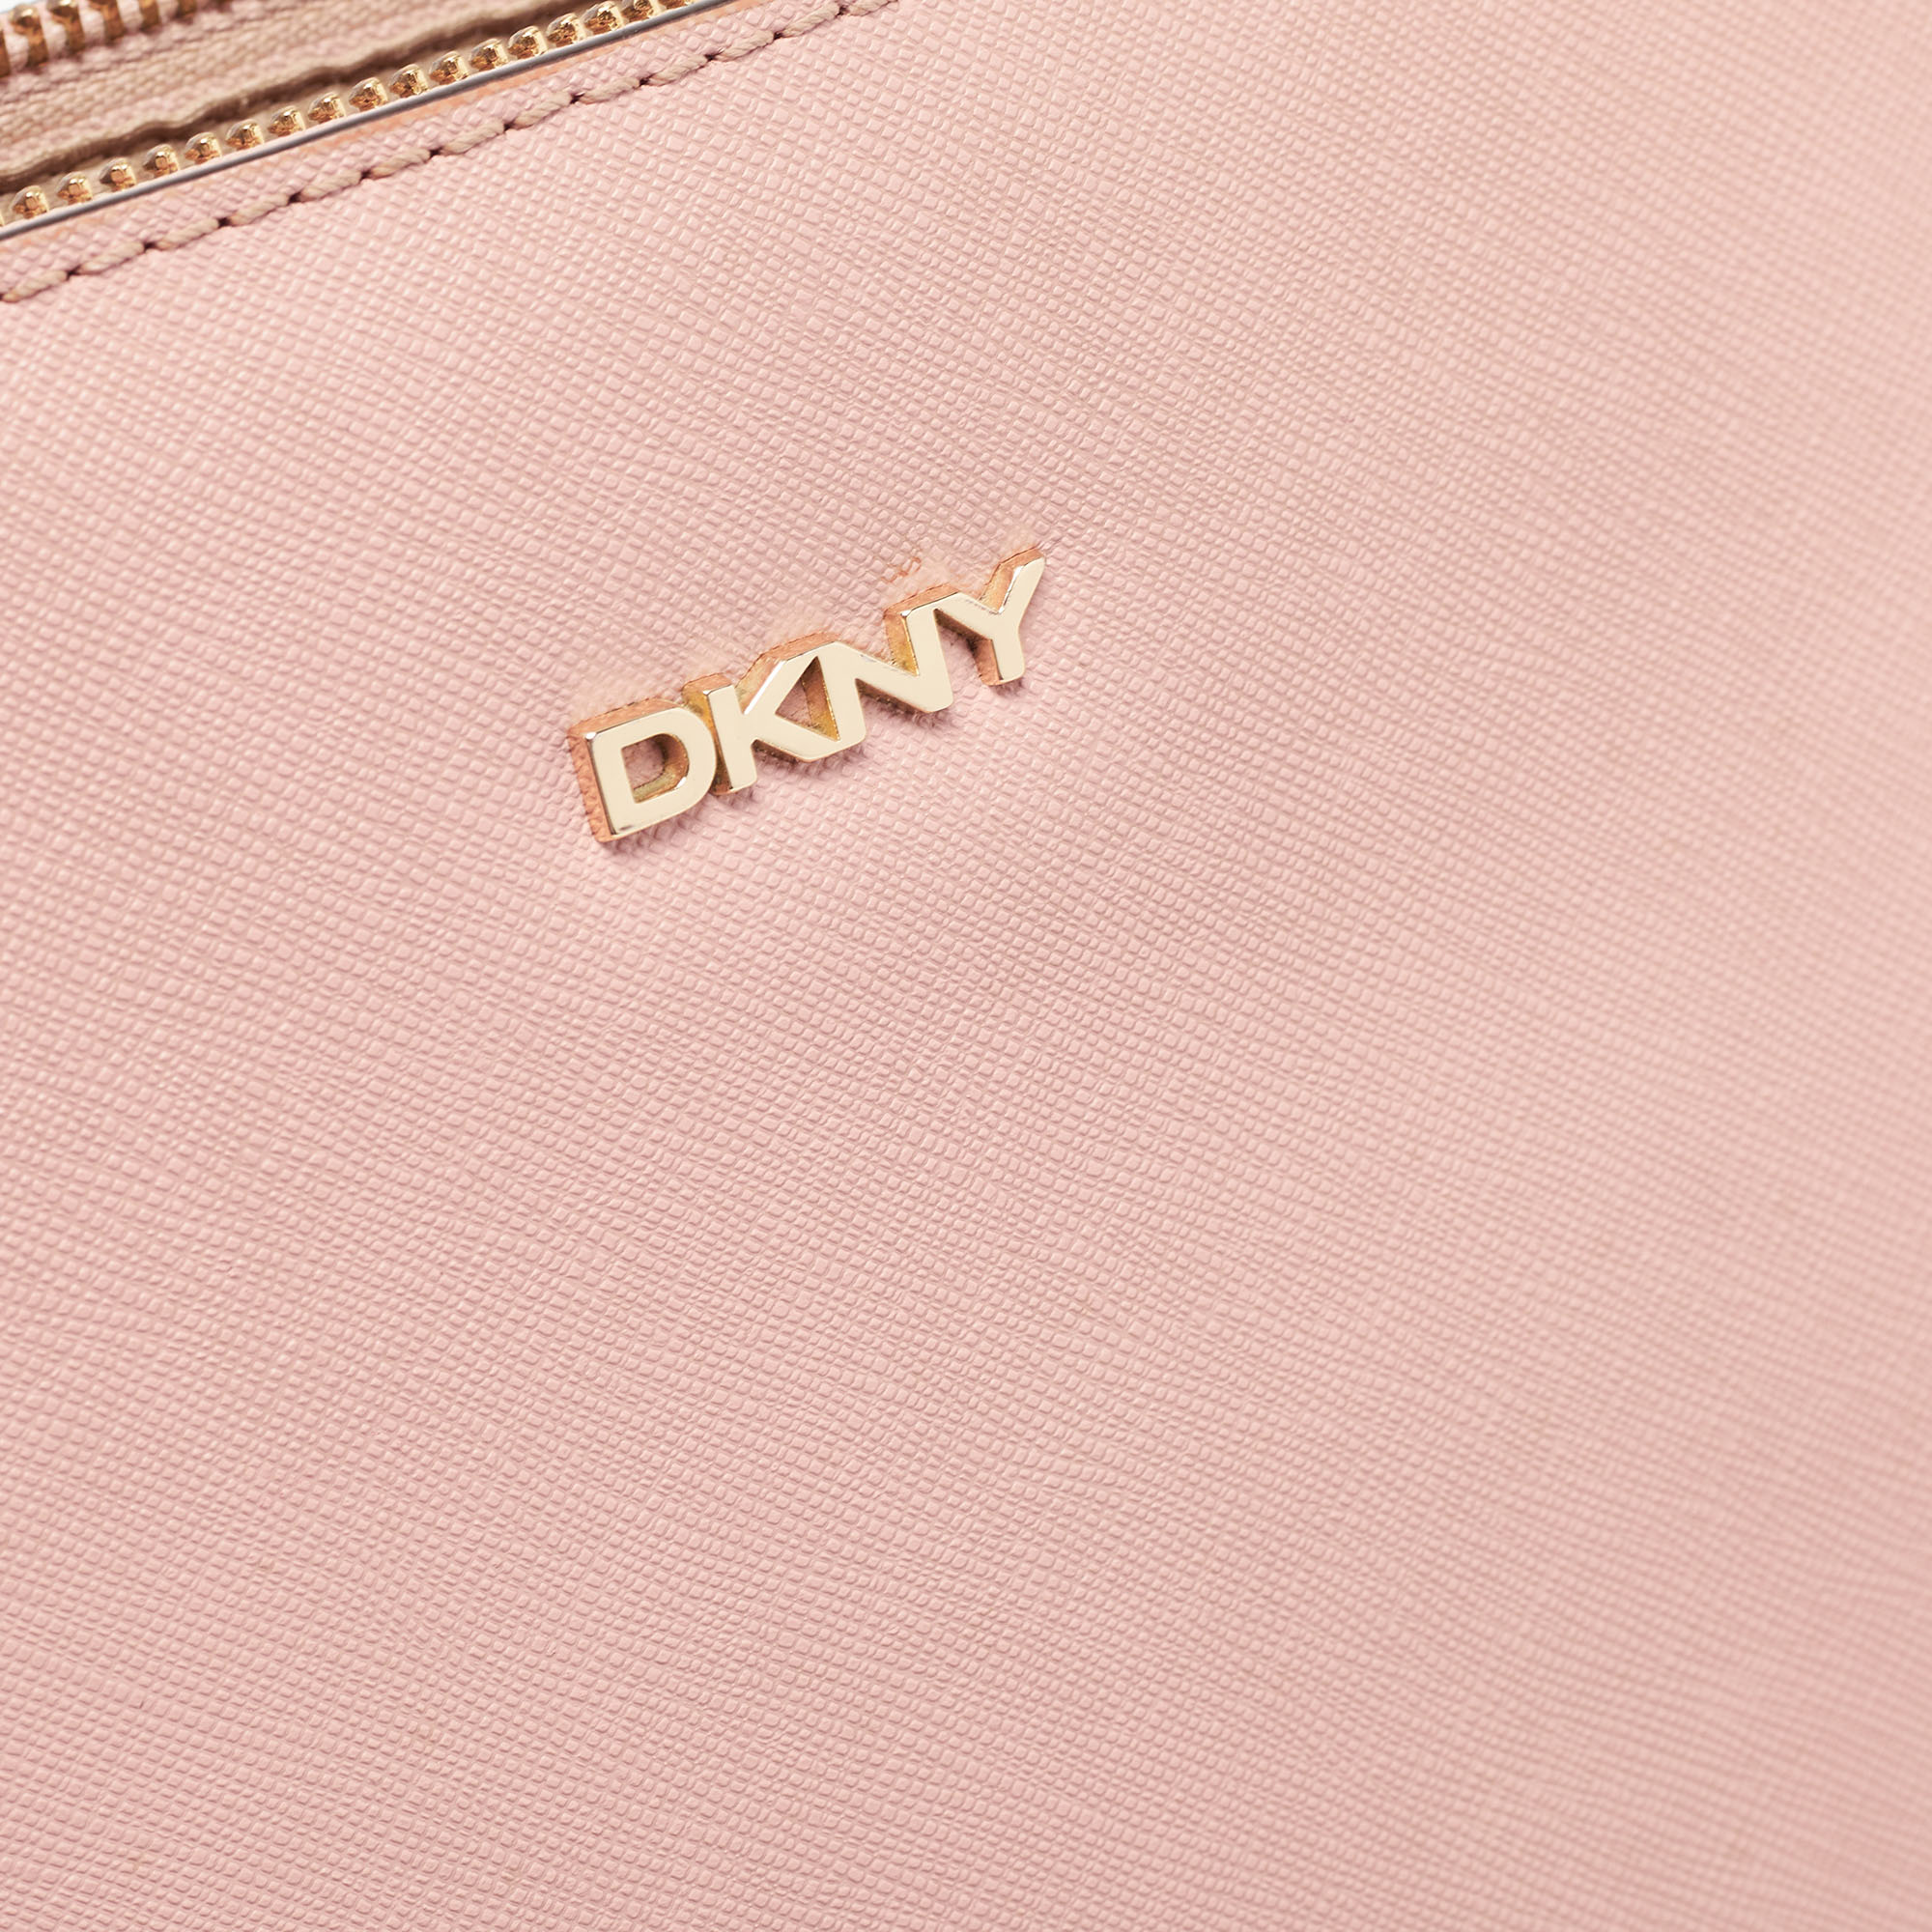 DKNY Light Pink Saffiano Leather Top Zip Tote